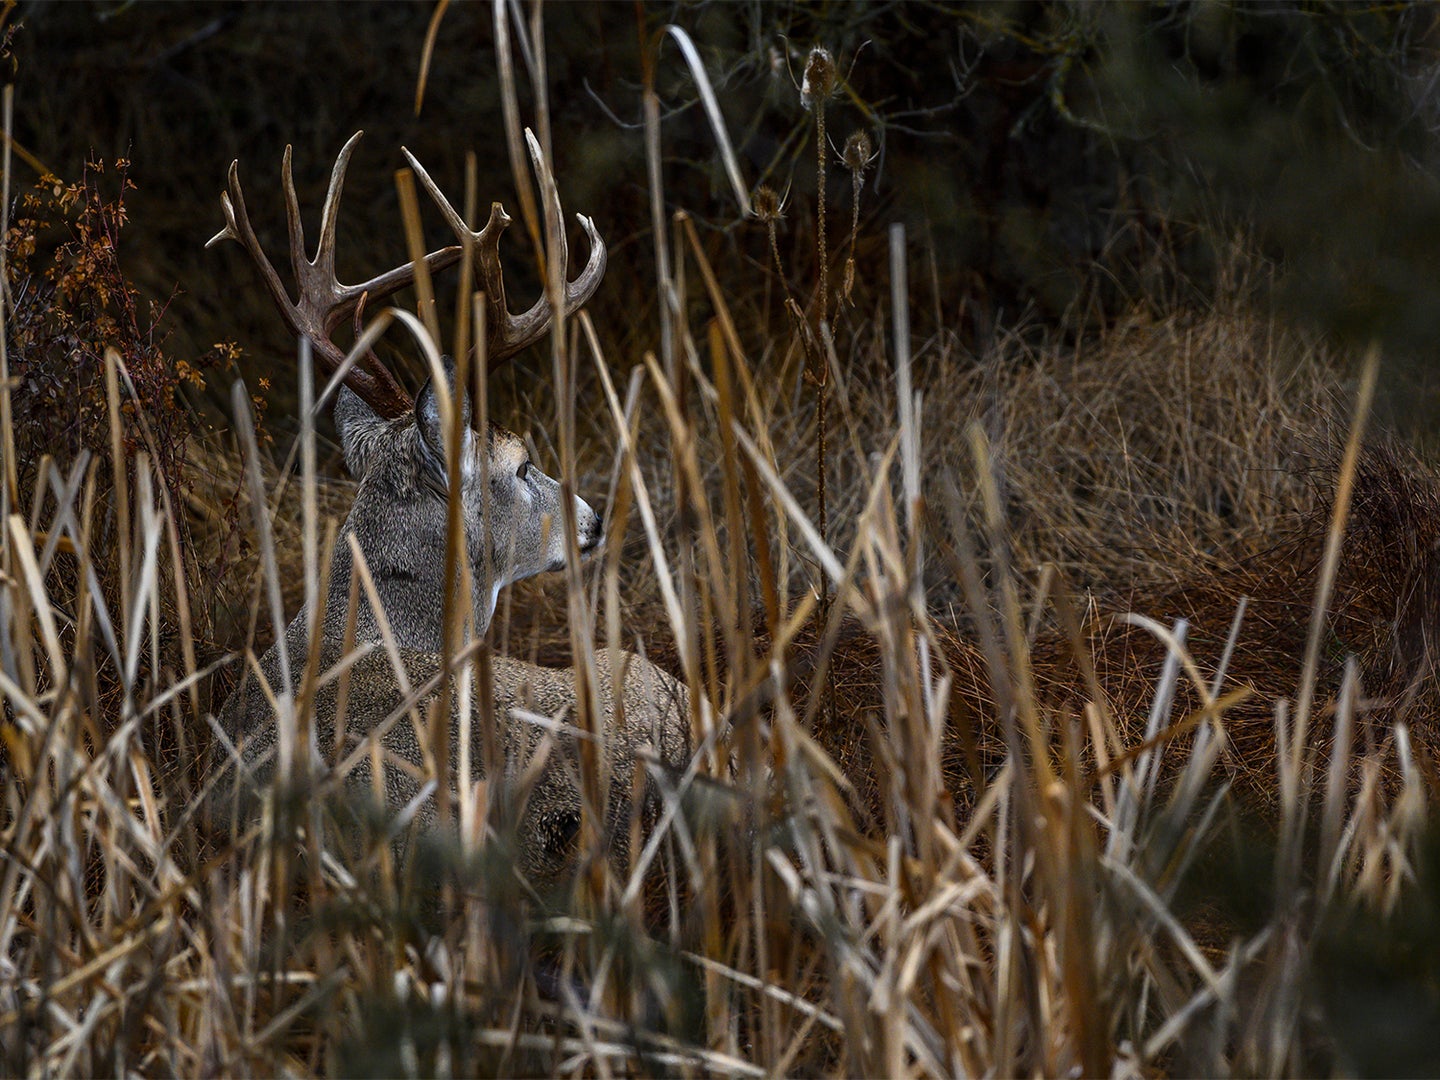 A whitetail buck that has bedded down in tall grass.